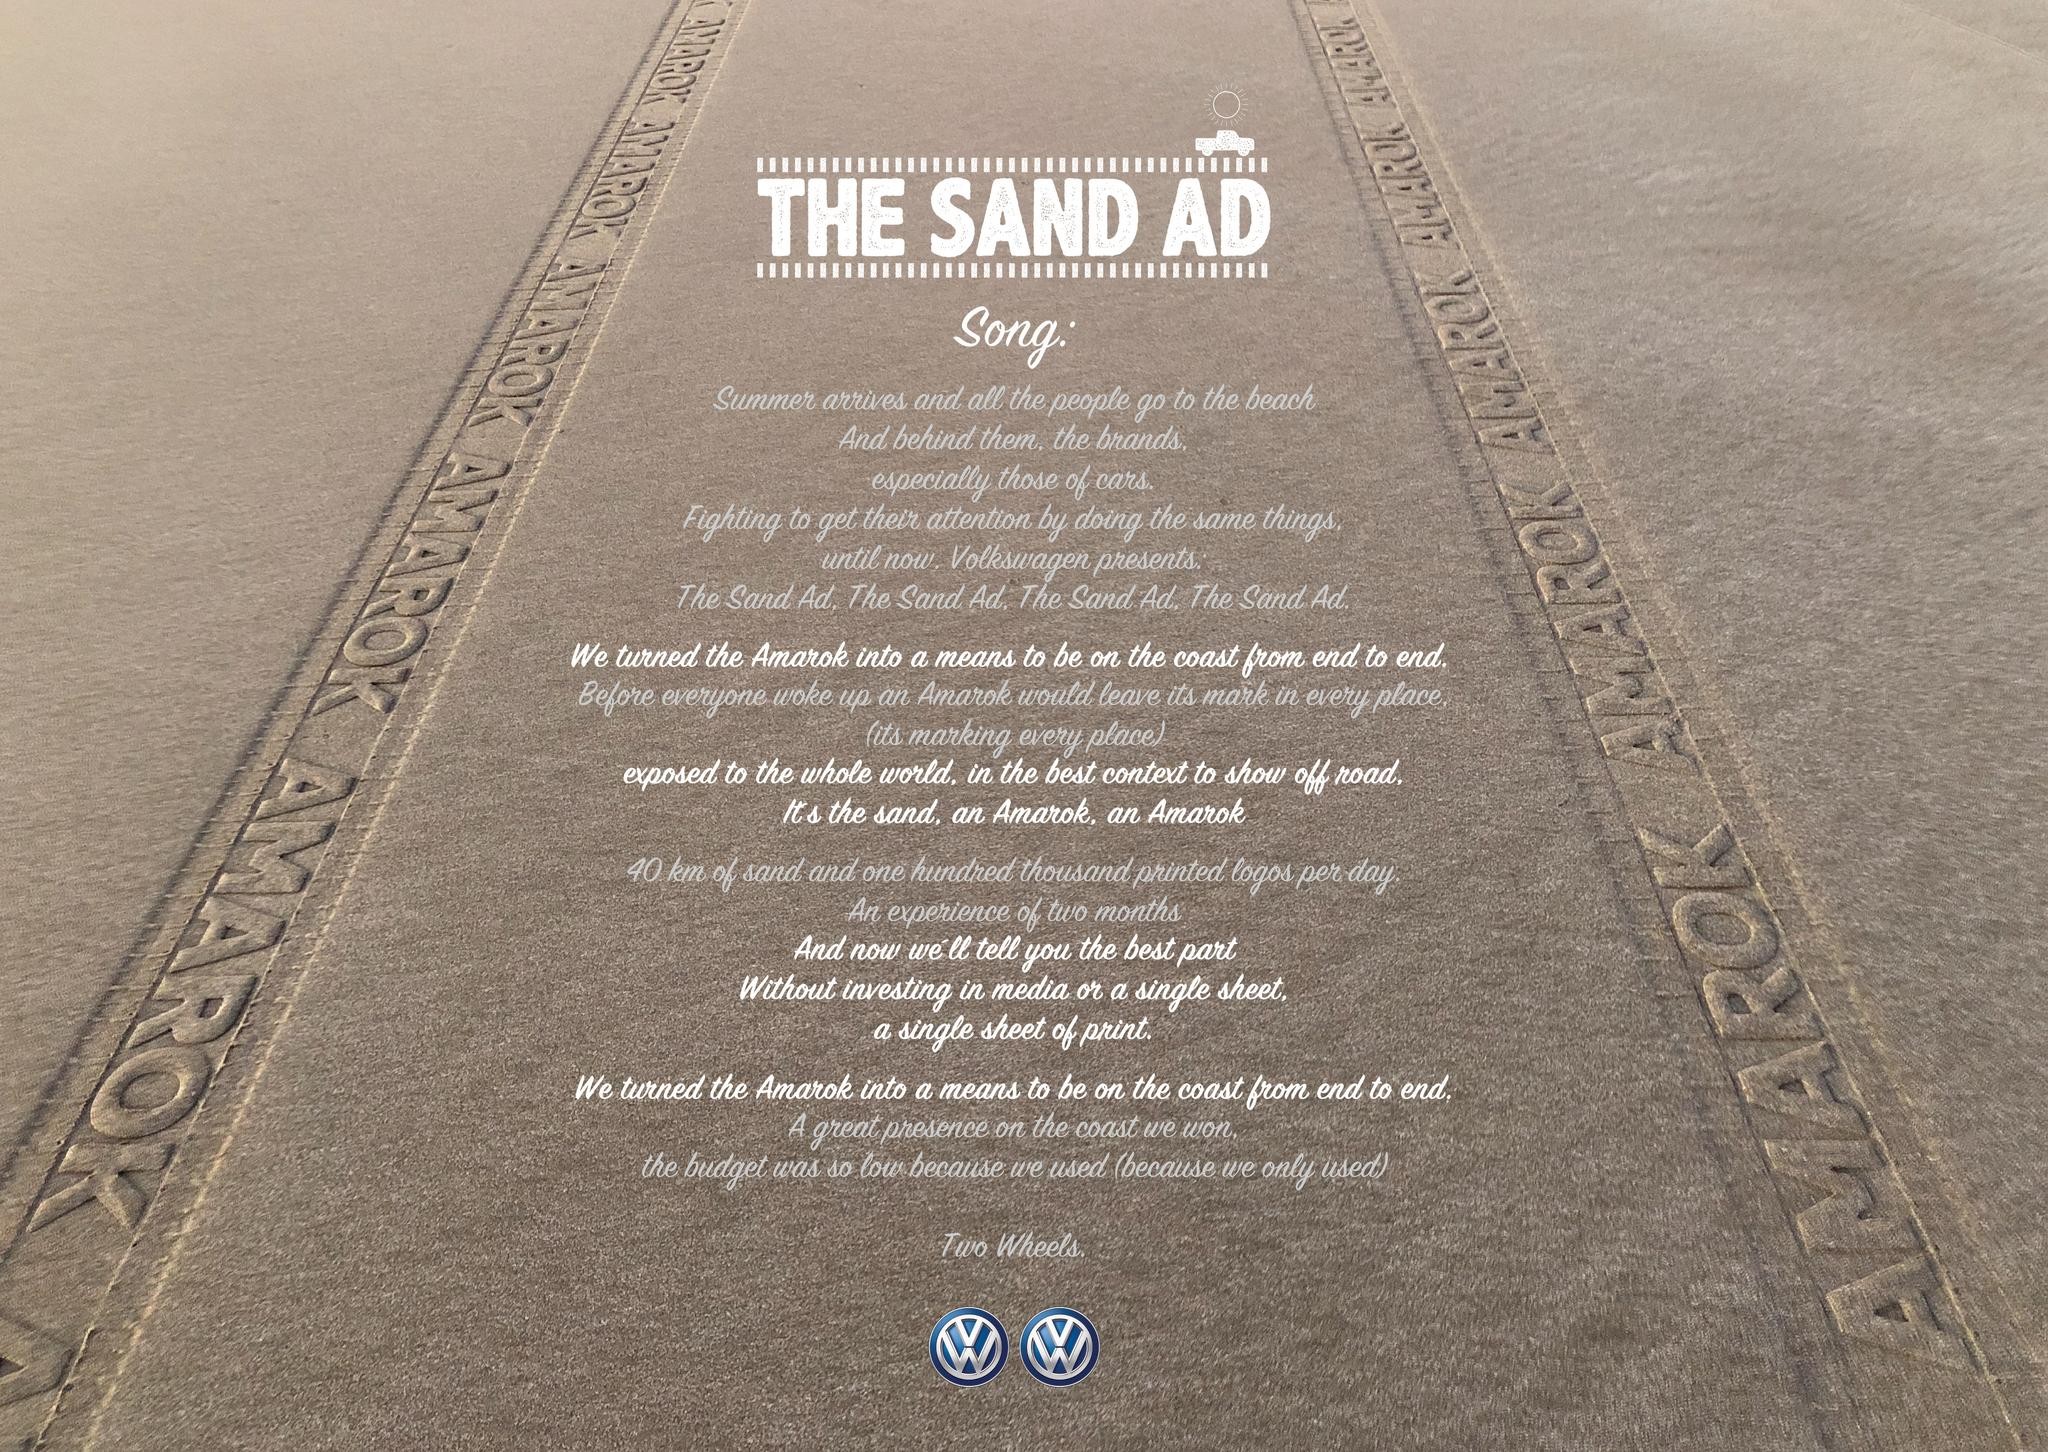 THE SAND AD